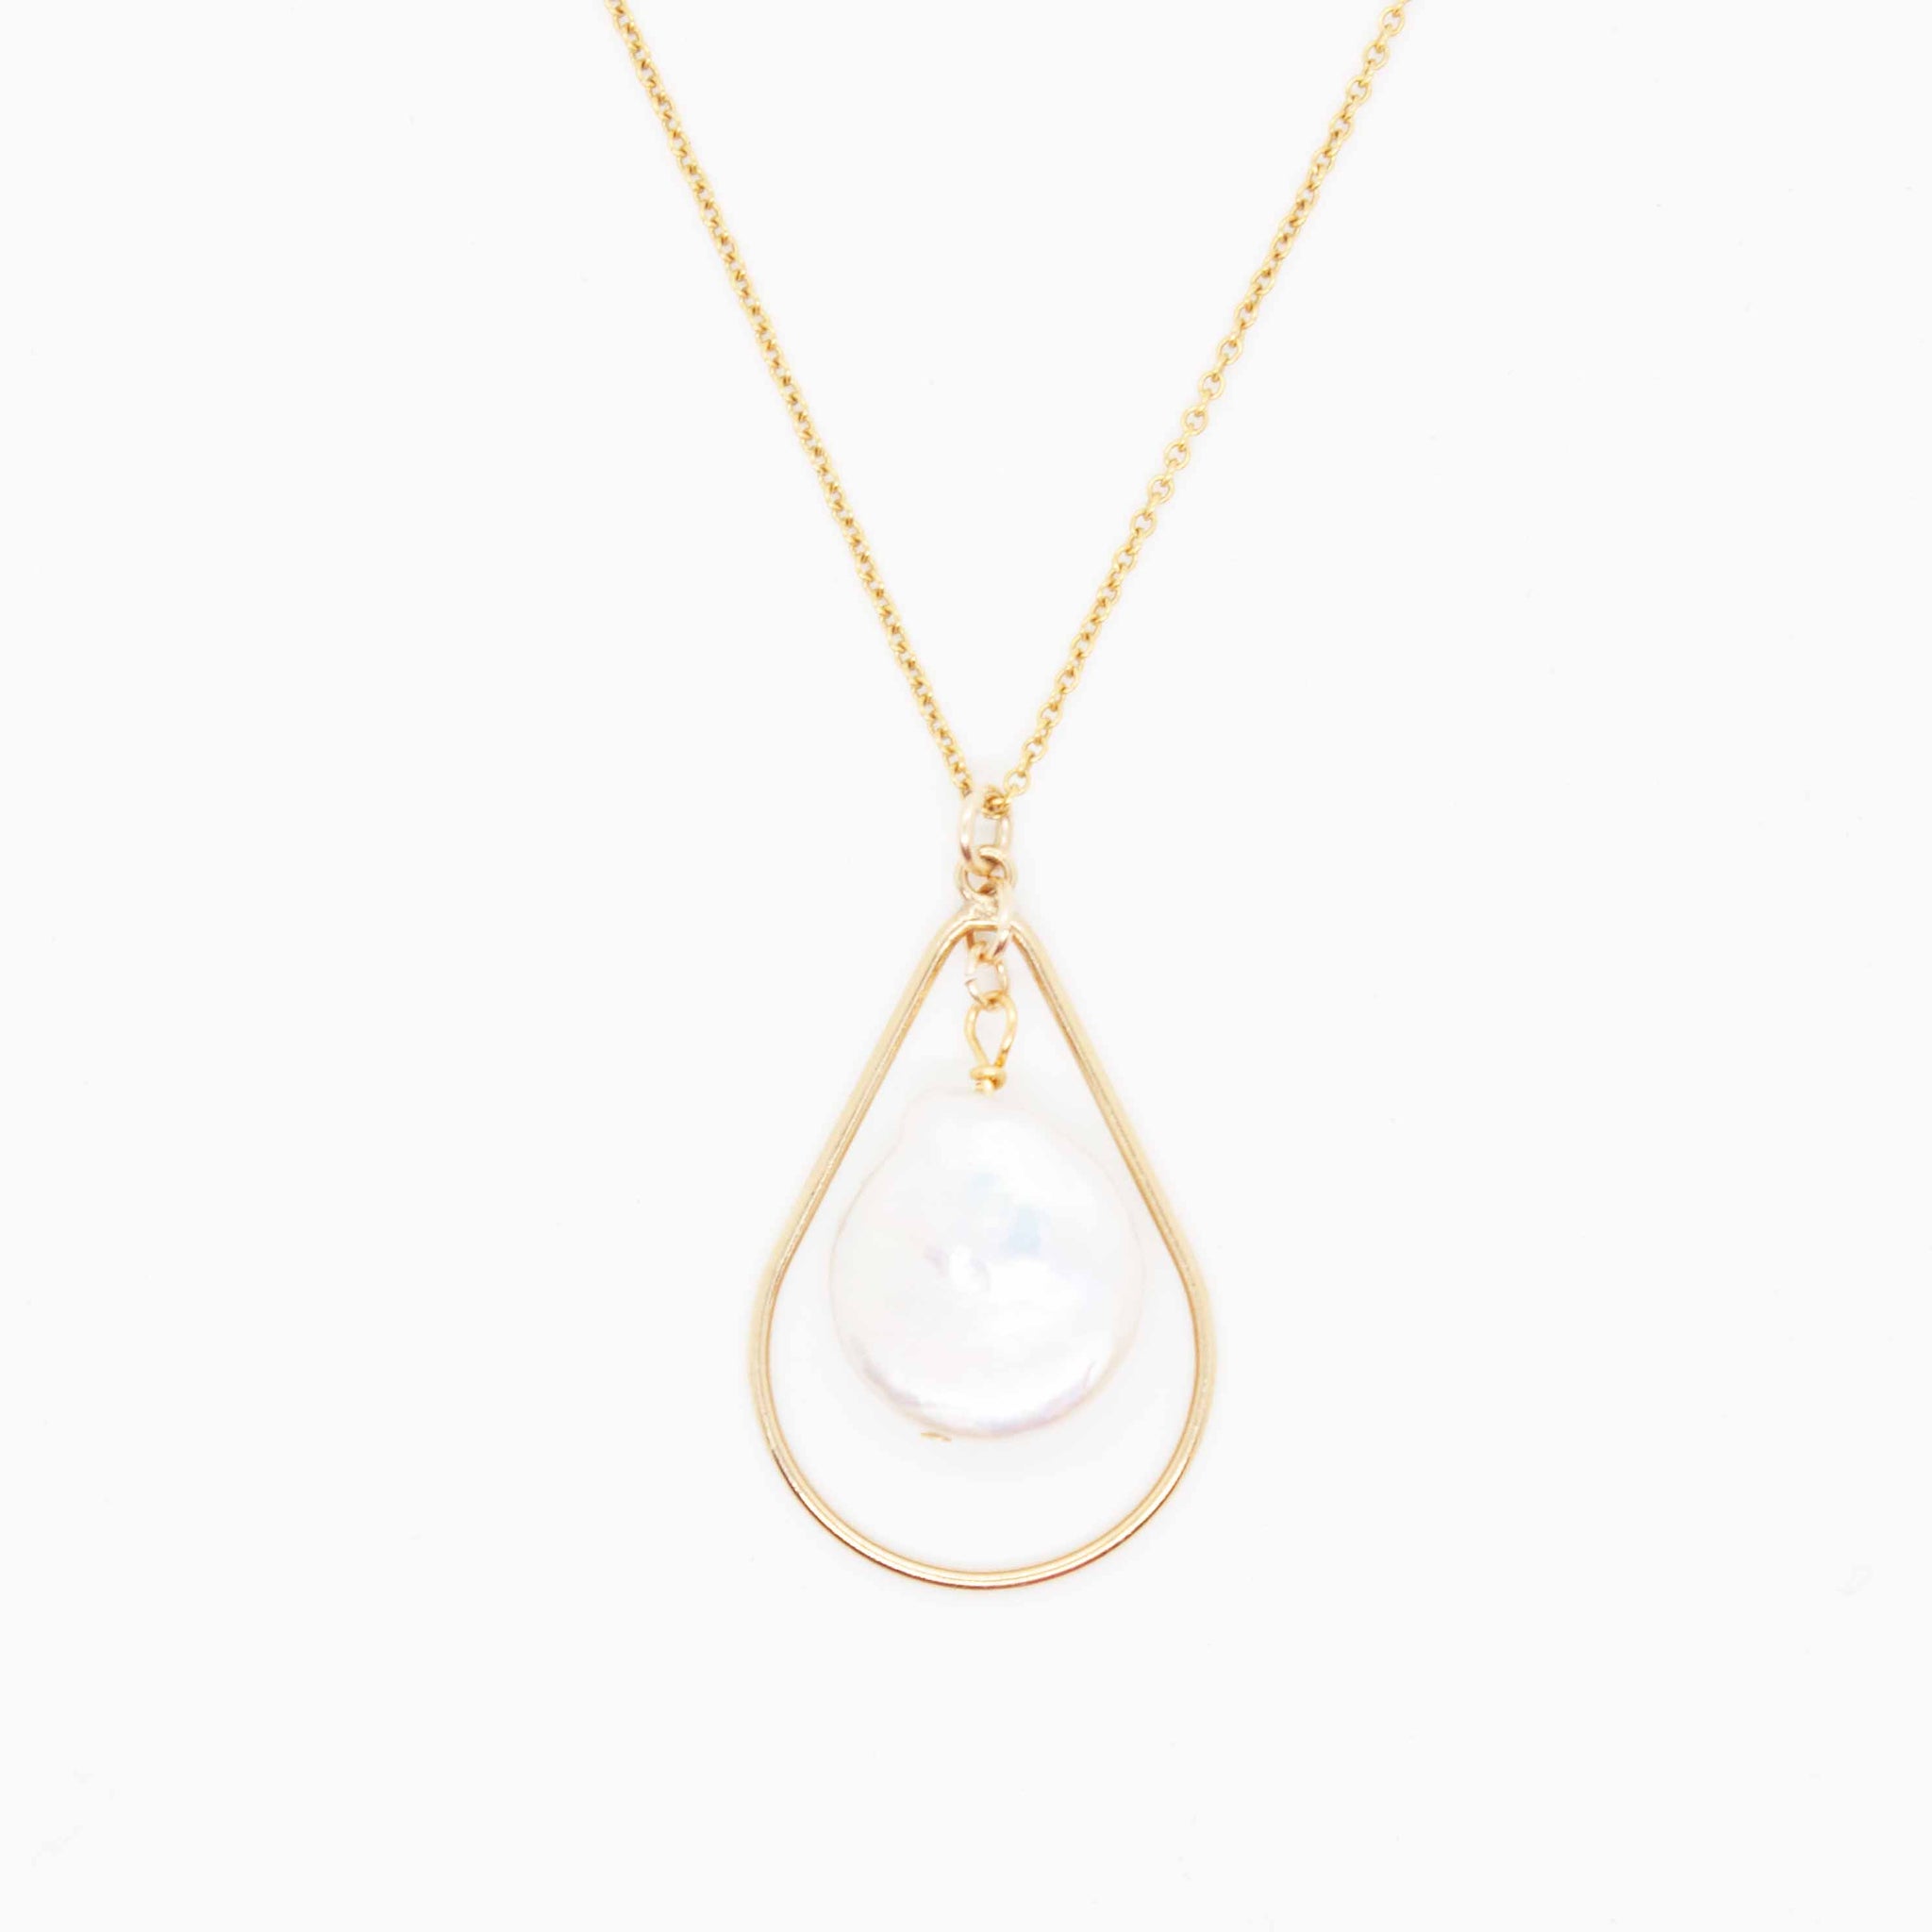 Designed with inspiration from a fellow fearless female, Lisa's necklace offers a modern shape with a classic pearl to freshen up your everyday! 16, 18 or 20 inch gold filled necklace with 1 1/4 inch gold filled teardrop pendant and keshi pearl. Handmade in by Toronto kp jewelry co.